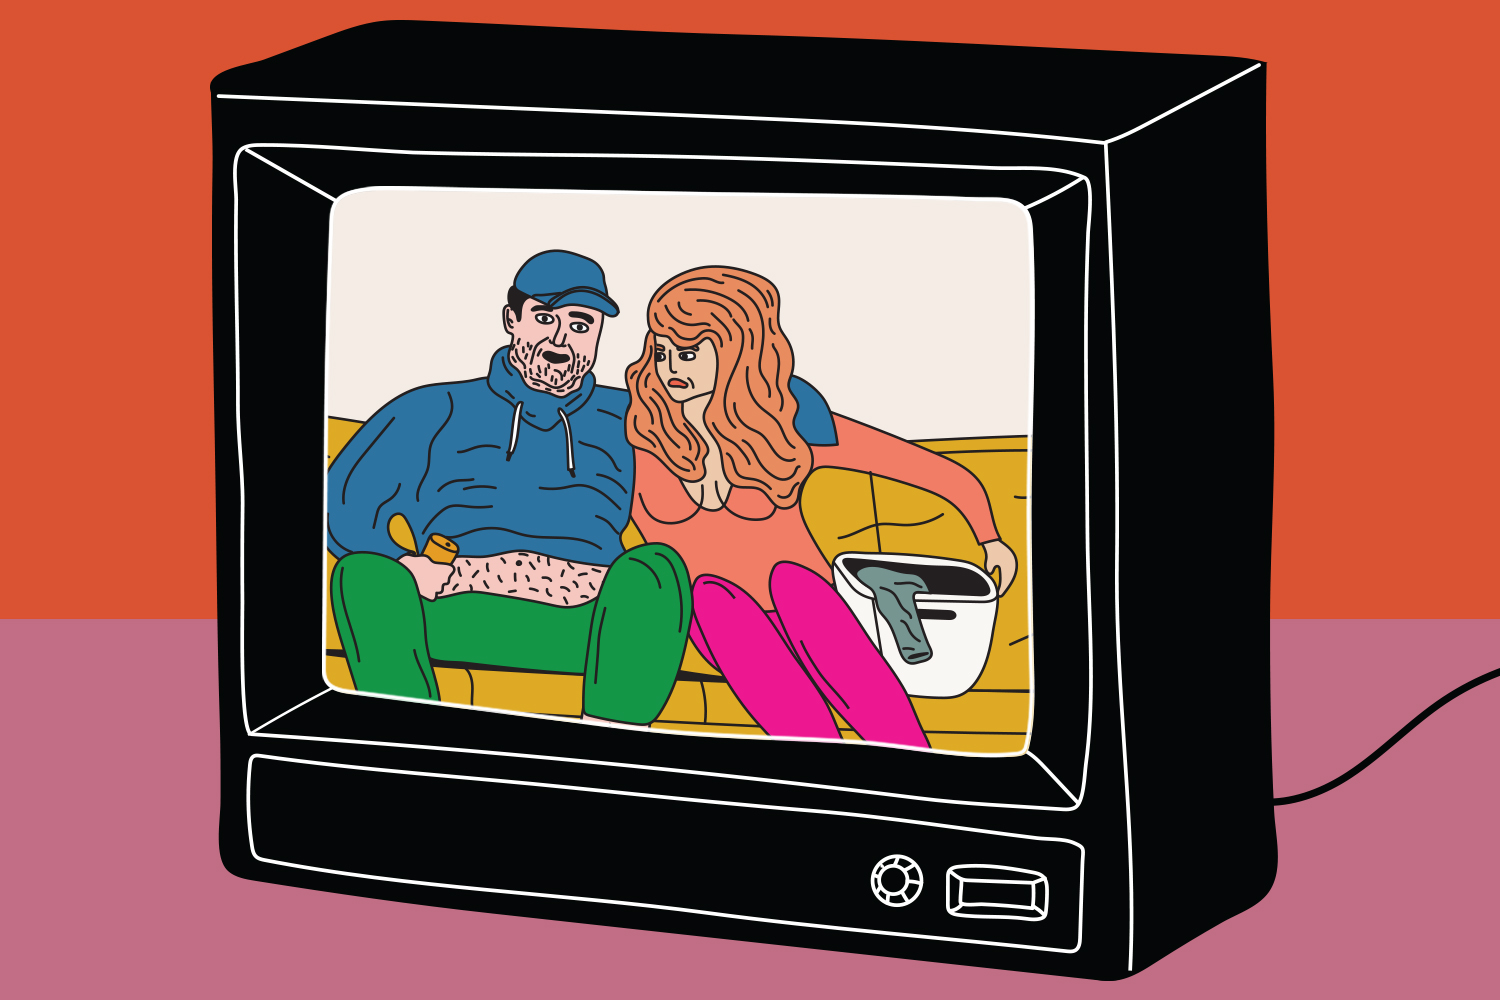 illustration shows TV screen featuring a man and woman sitting on sofa